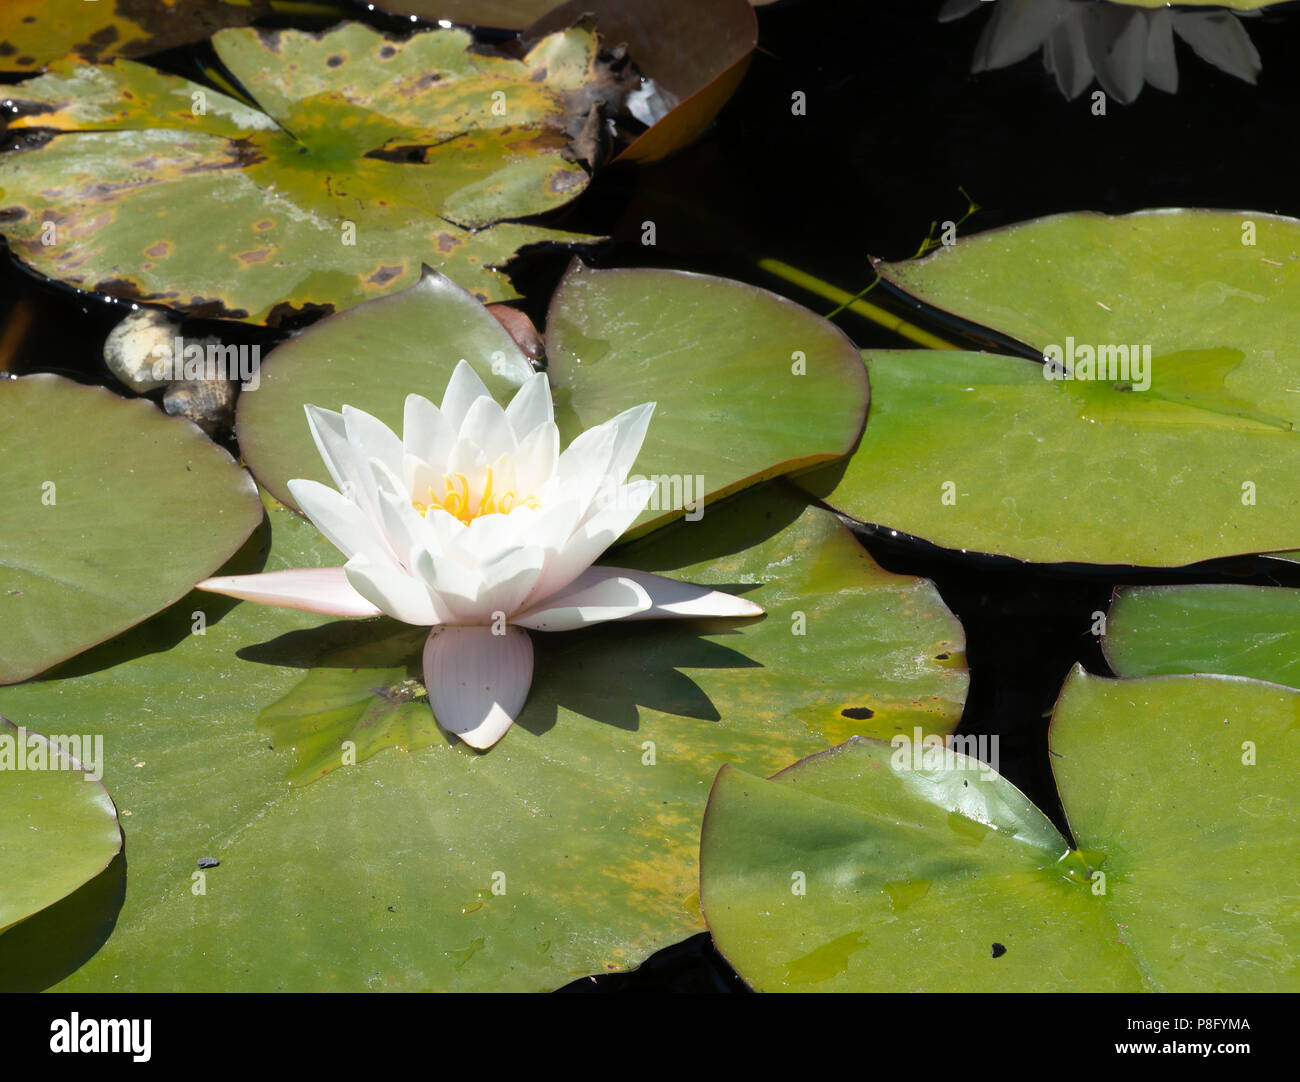 A Beautiful Water Lily Flower in Full Bloom in a Pond by Lake Geneva at the Swiss Vapeur Parc at Le Bouveret Switzerland Stock Photo